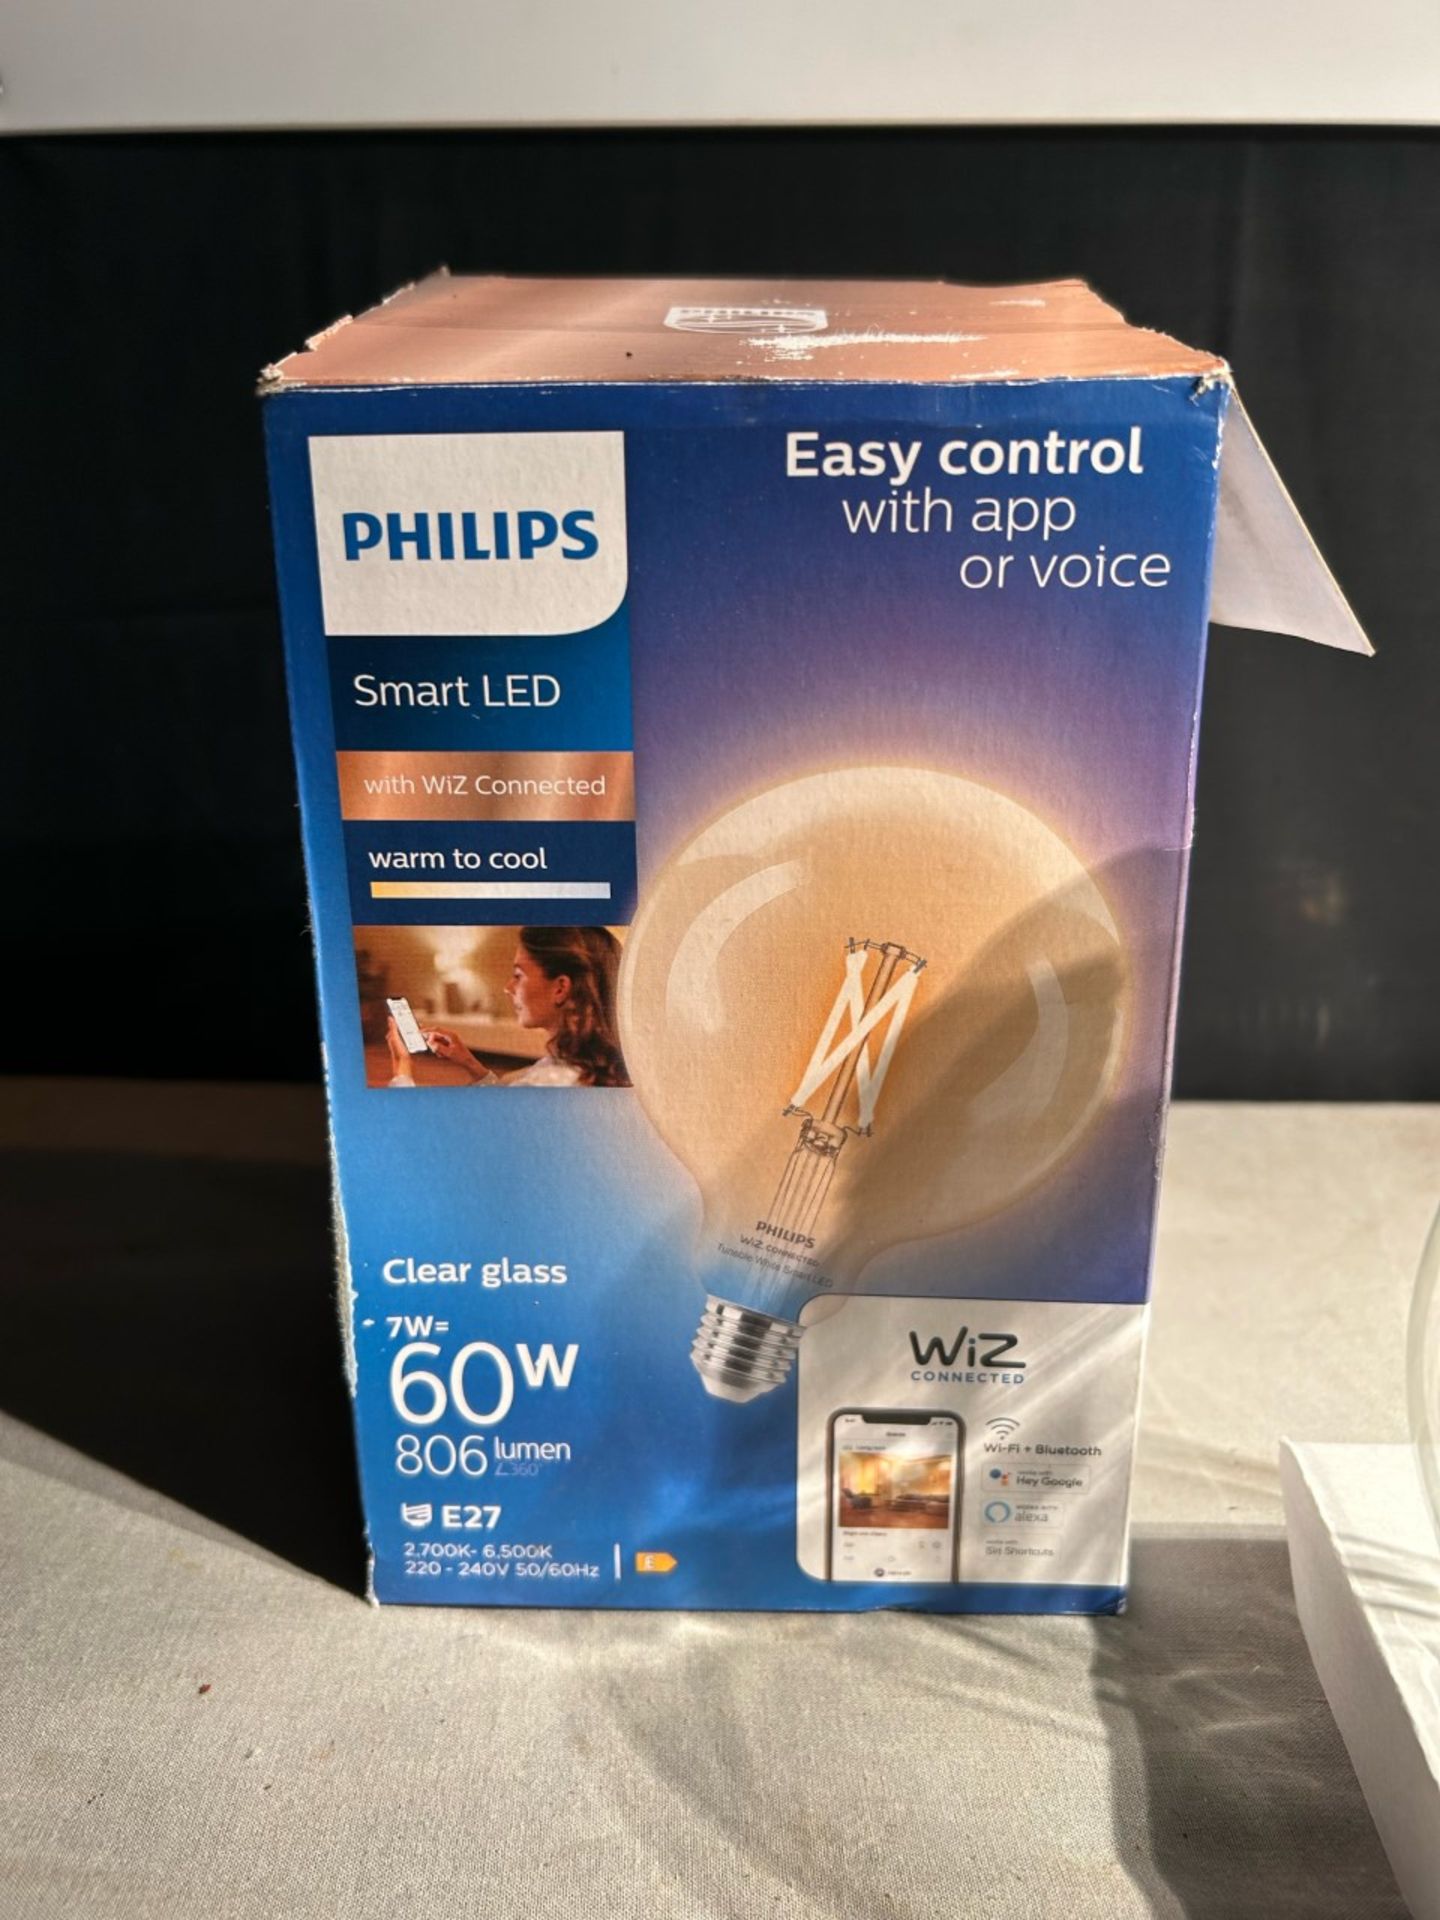 Philips smart LED bulb. Wiz connected lightbulb. Connects to wifi and controlled by app plus voice - Bild 2 aus 3